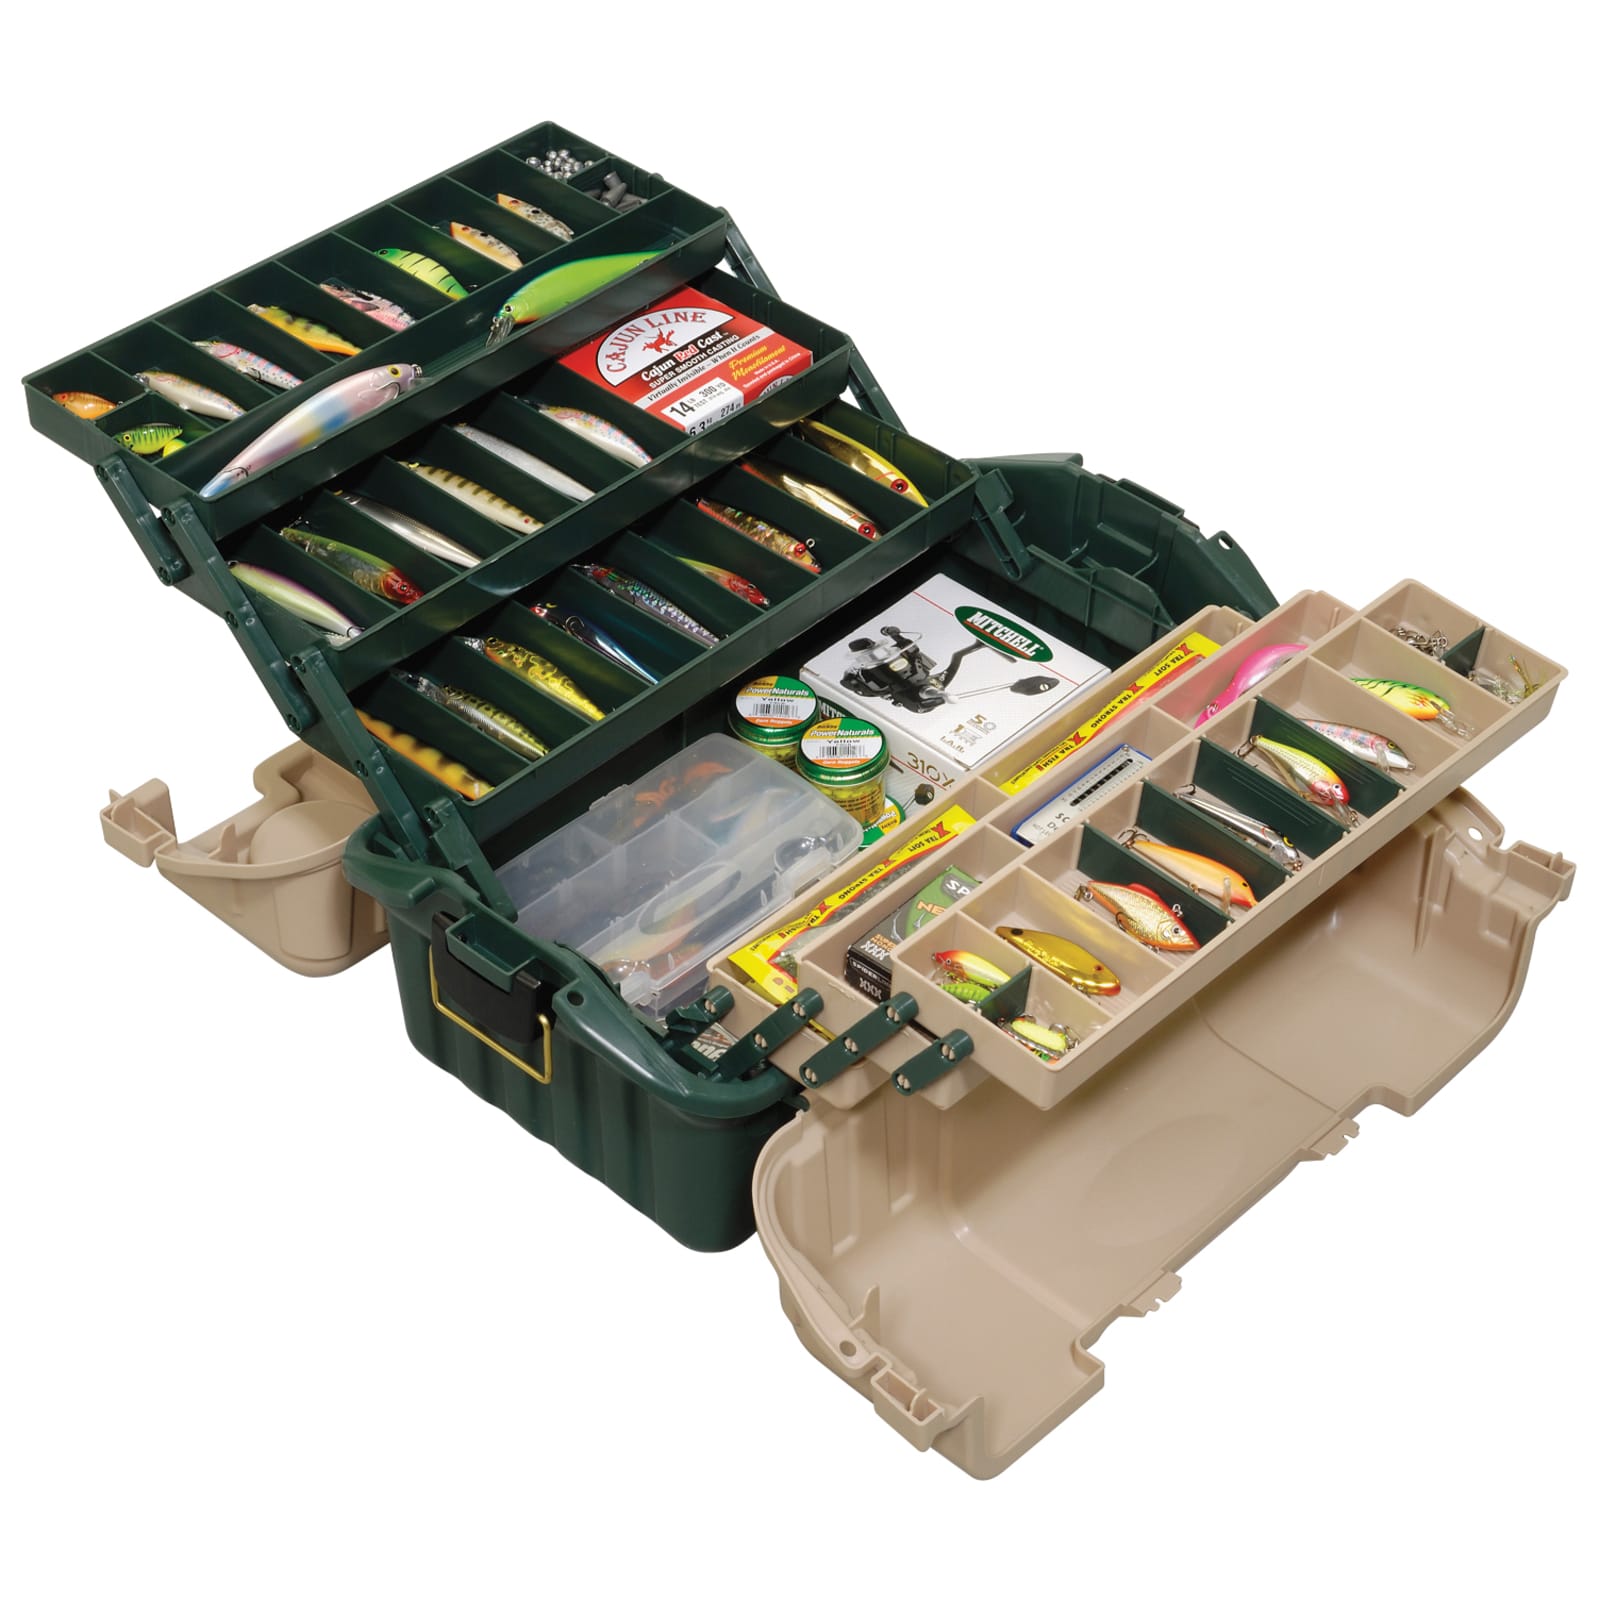 Magnum Green/Sandstone Hip Roof 6-Tray Tackle Box by Plano at Fleet Farm